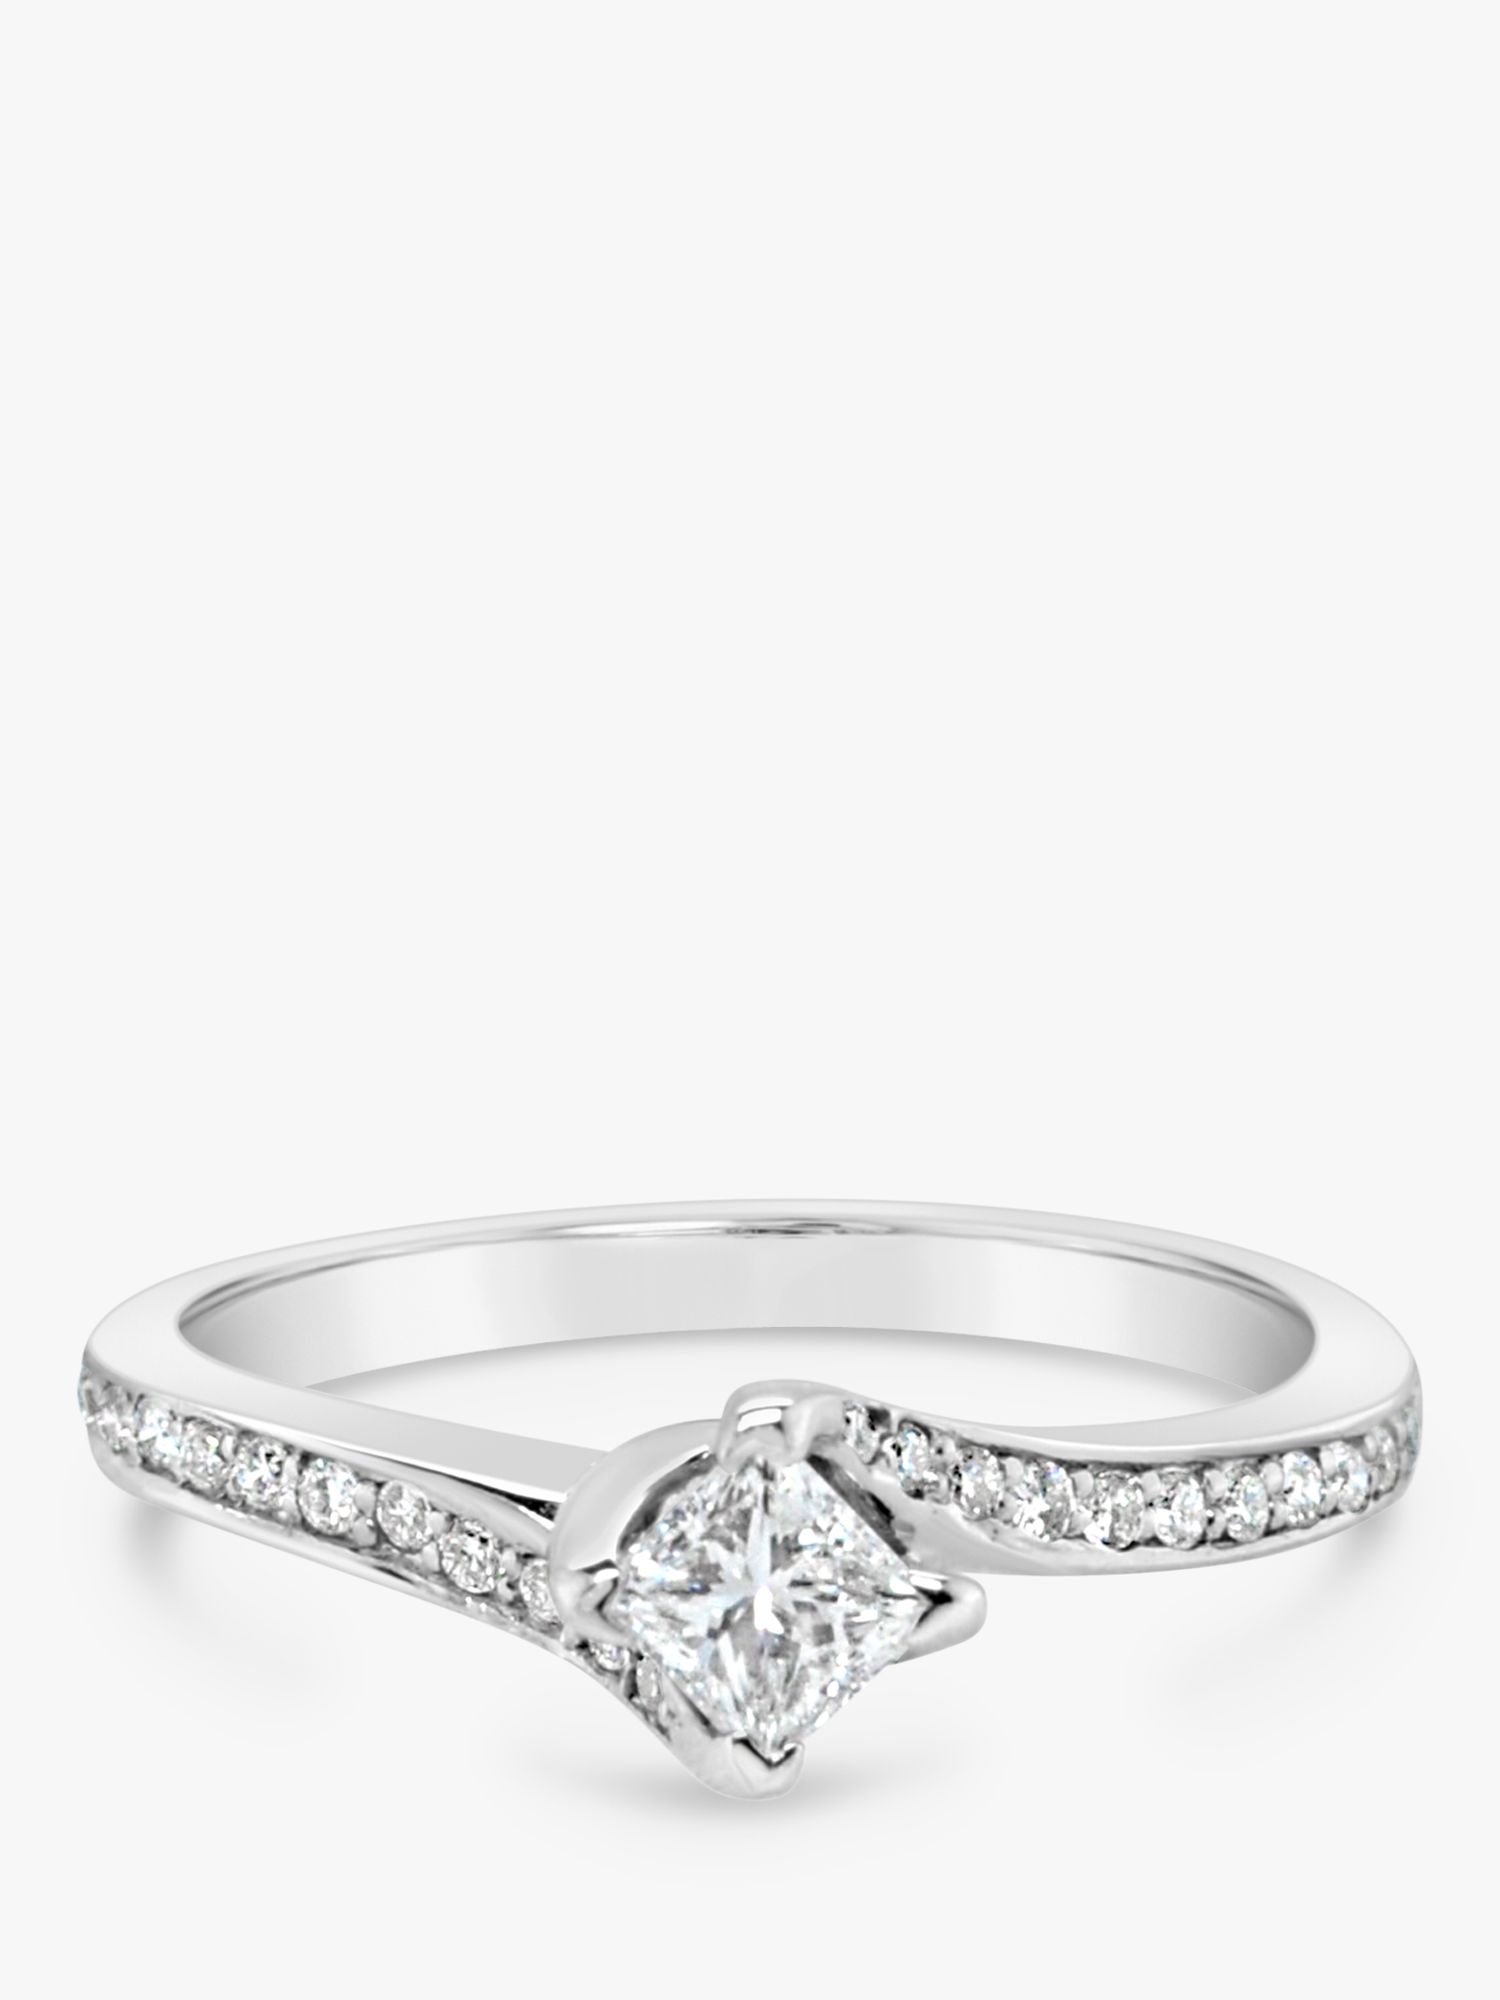 Buy Milton & Humble Jewellery Second Hand 18ct White Gold Diamond Twist Engagement Ring Online at johnlewis.com